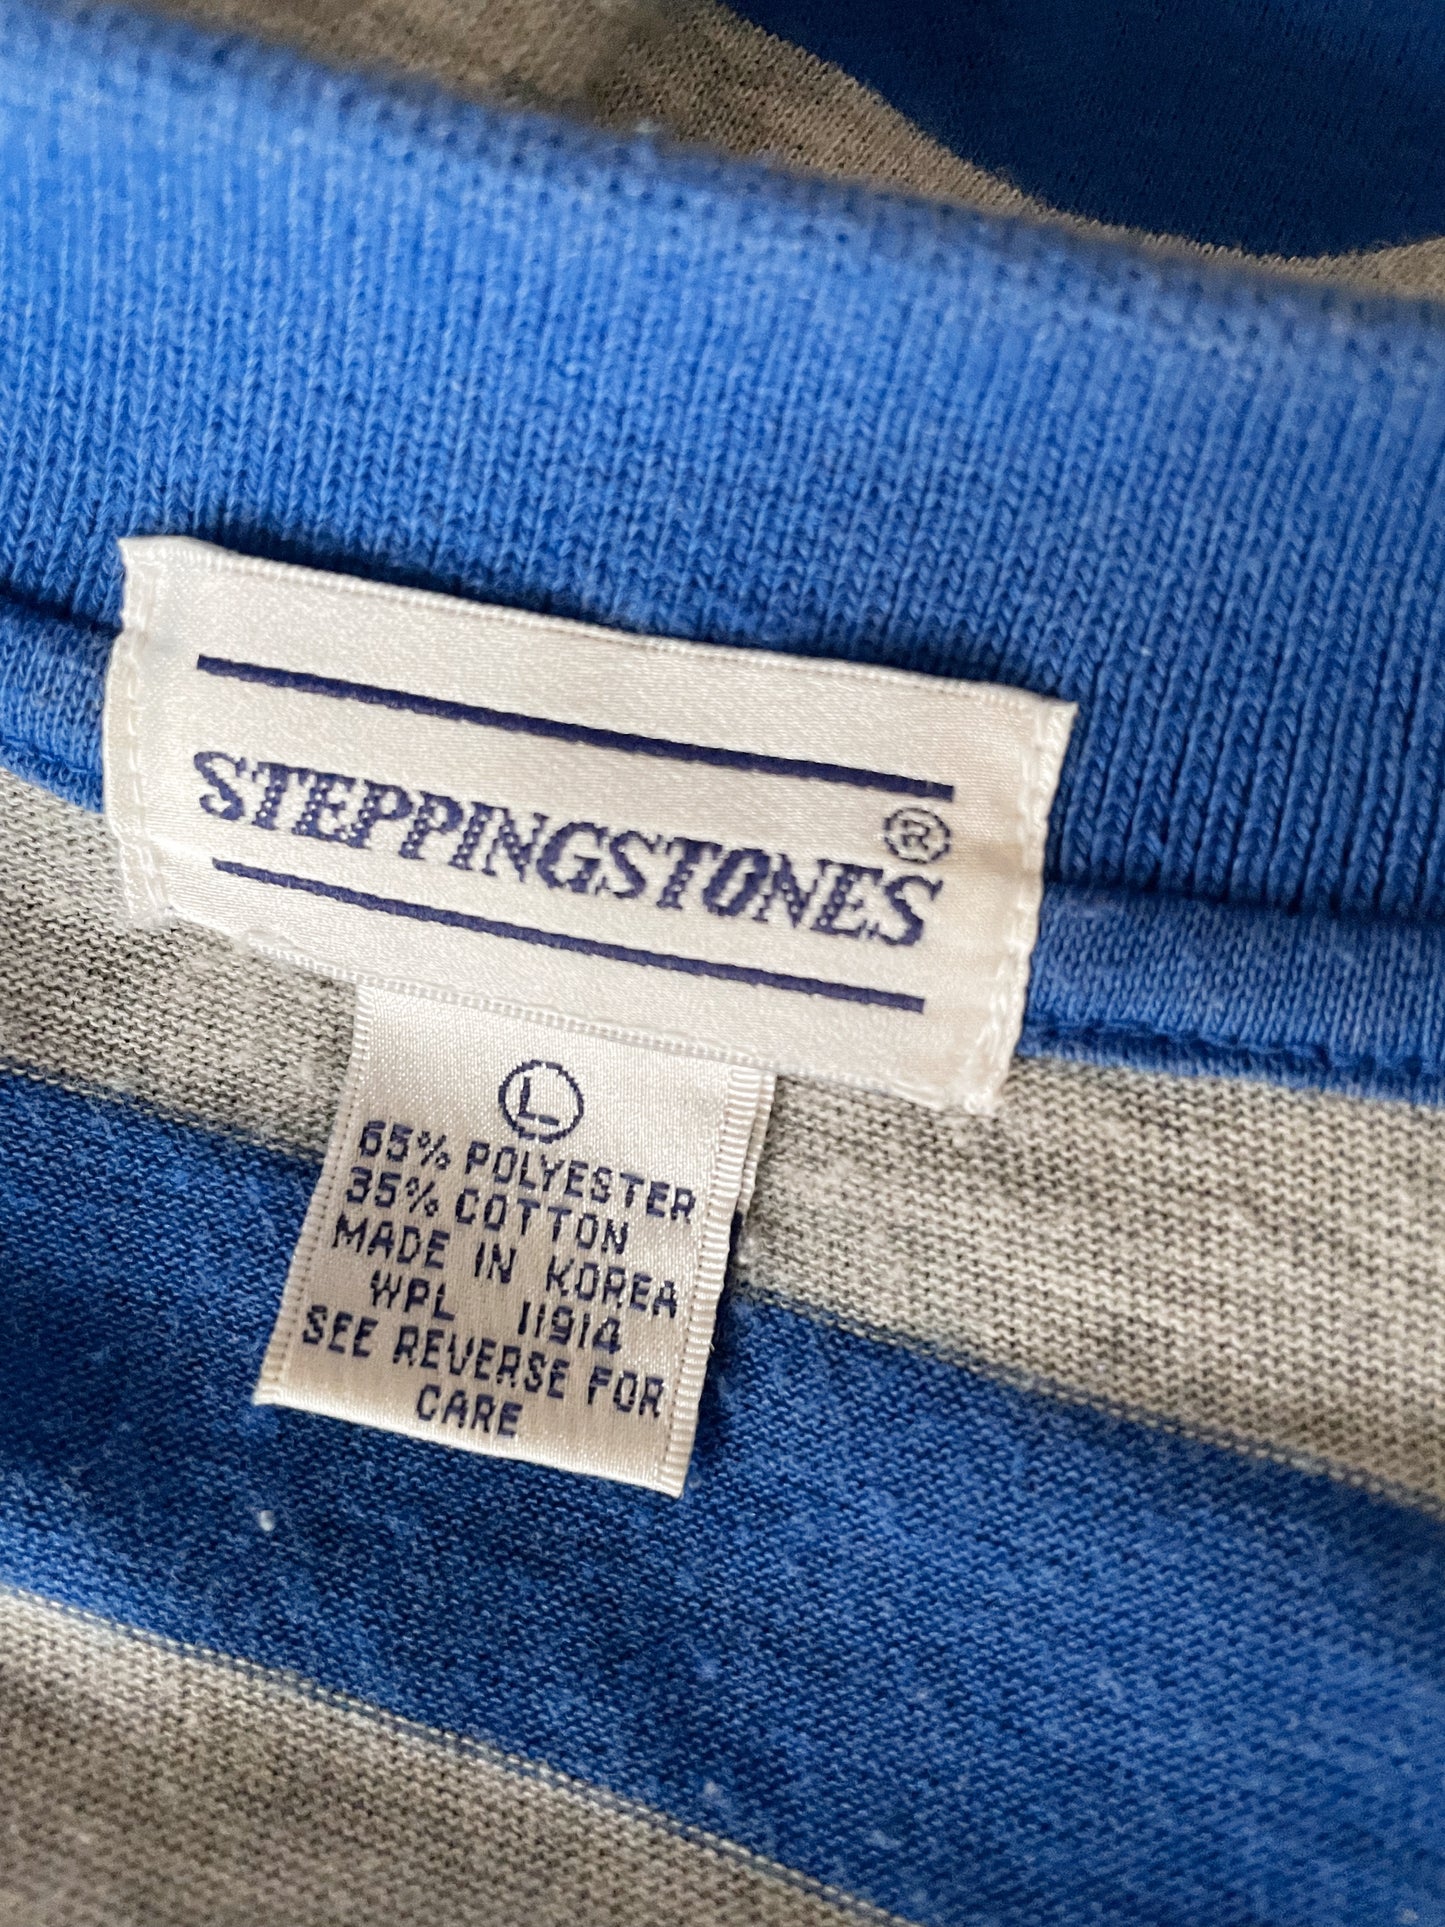 90s Stepping Stones Polo